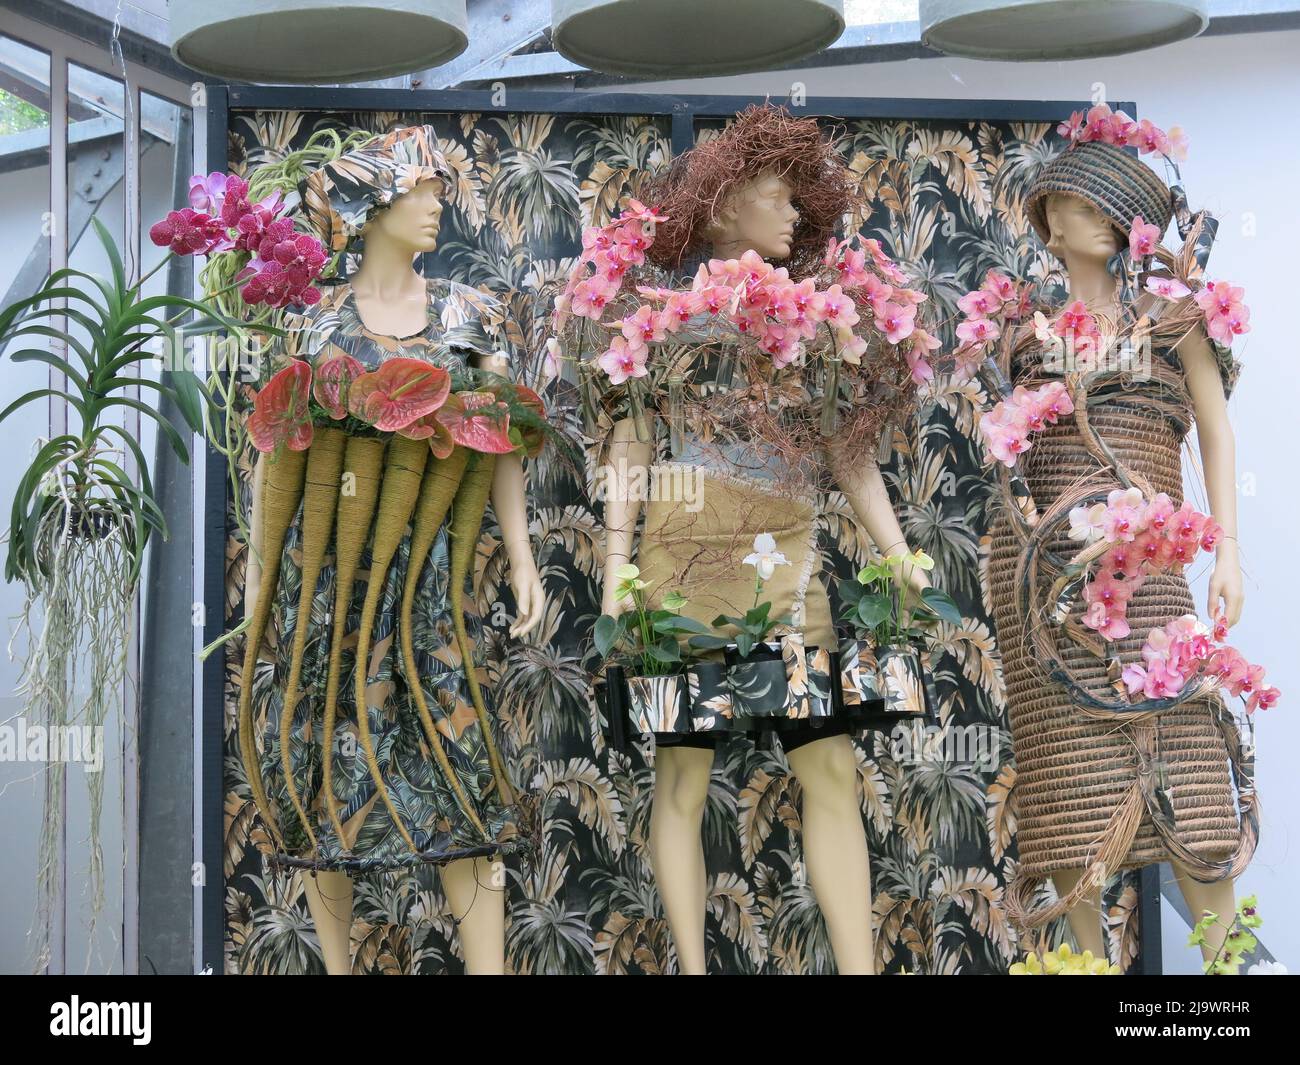 Artistry, creativity & floristry in this display that uses female mannequins to display a stunning array of orchids; Beatrix Pavilion, Keukenhof 2022. Stock Photo